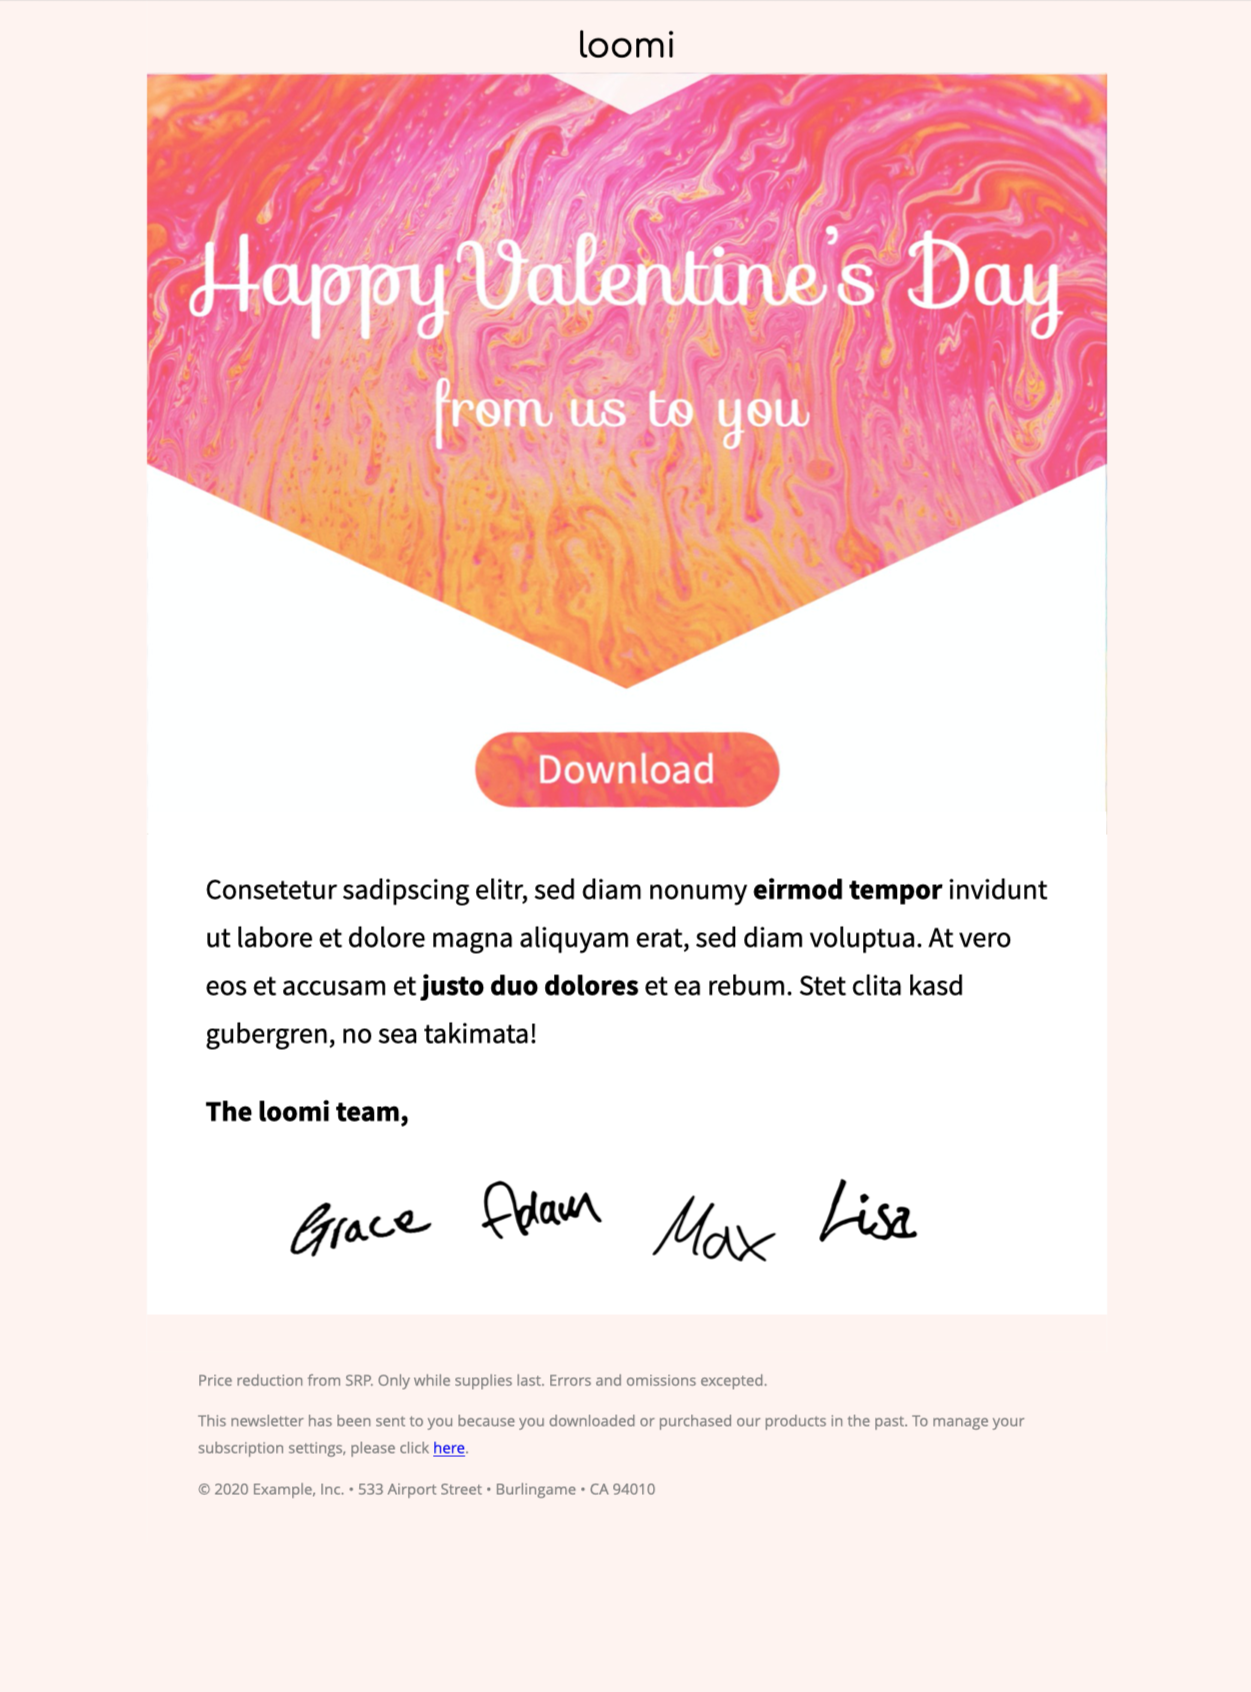 html email template for valentine's day